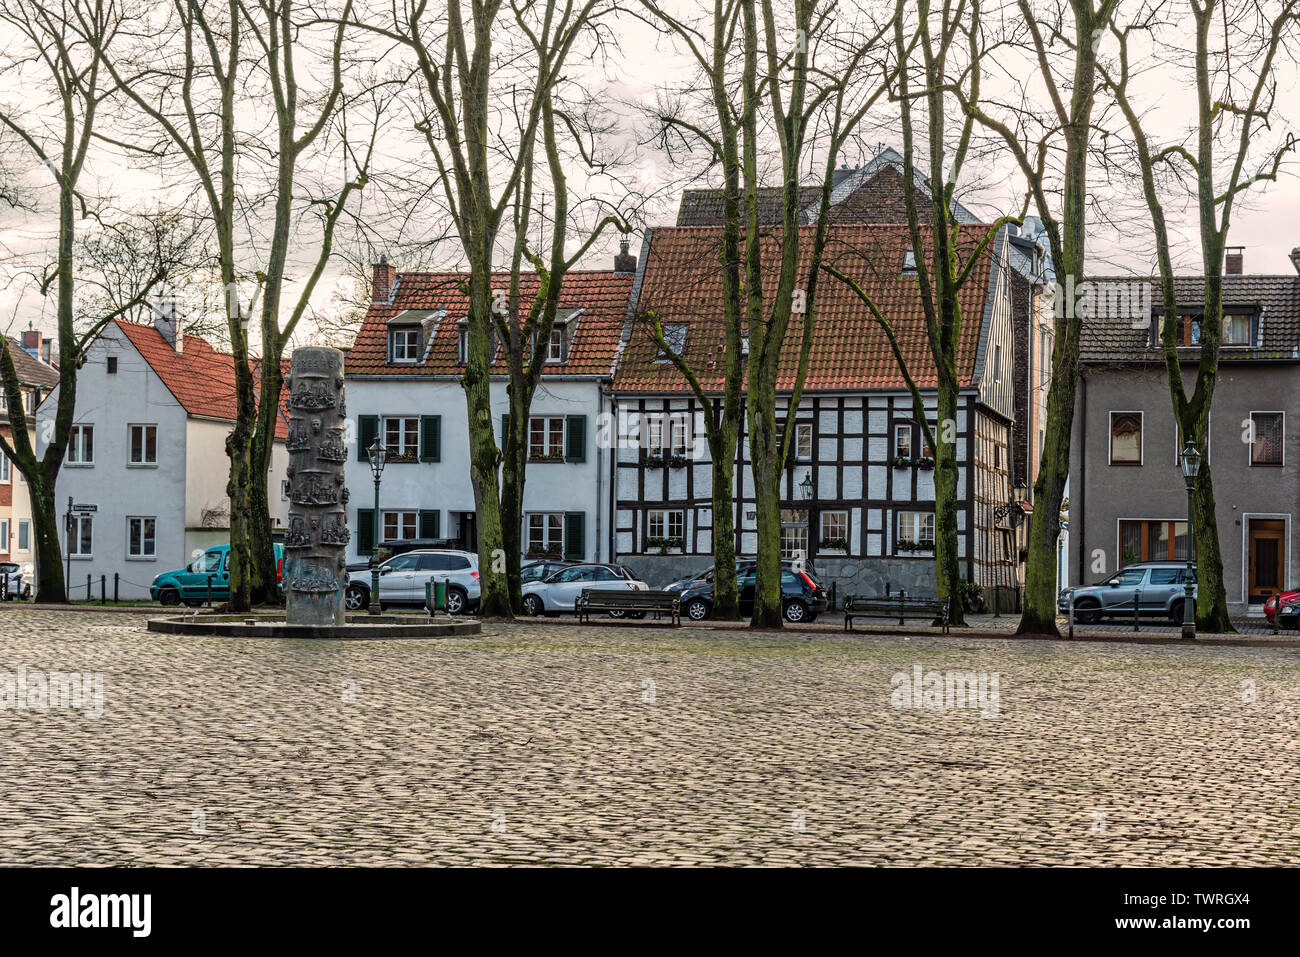 Dusseldorf, Germany - Jan 29, 2019: View at the old houses at the square by St. Margareta Catholic parish church in Dusseldorf, Gerresheim, Germany. Stock Photo